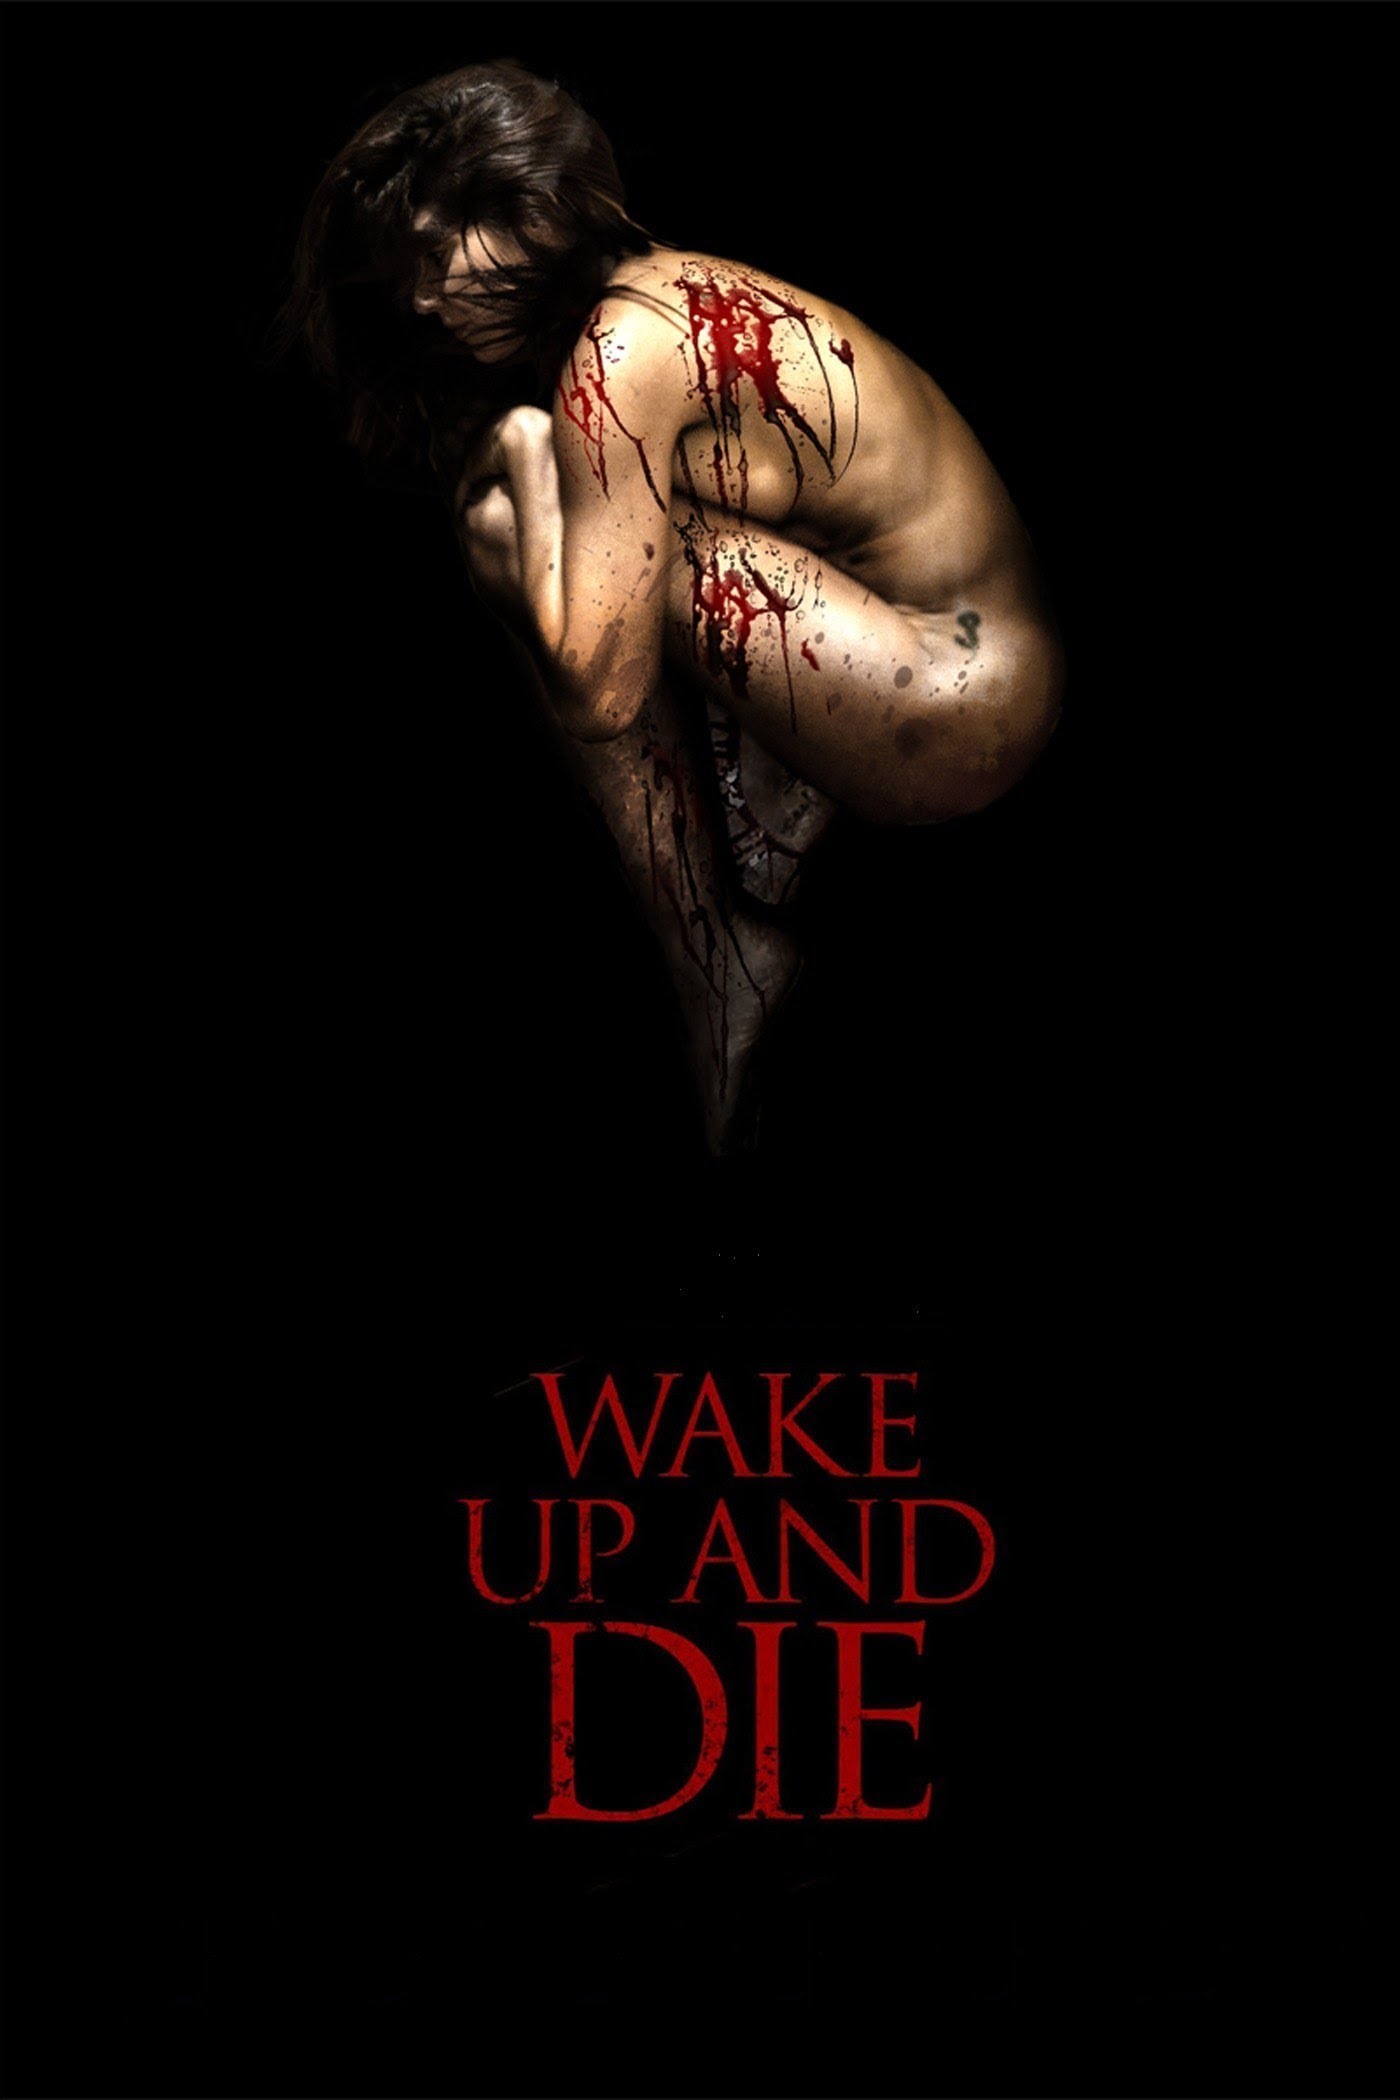 Wake Up and Die [HD] (2011)